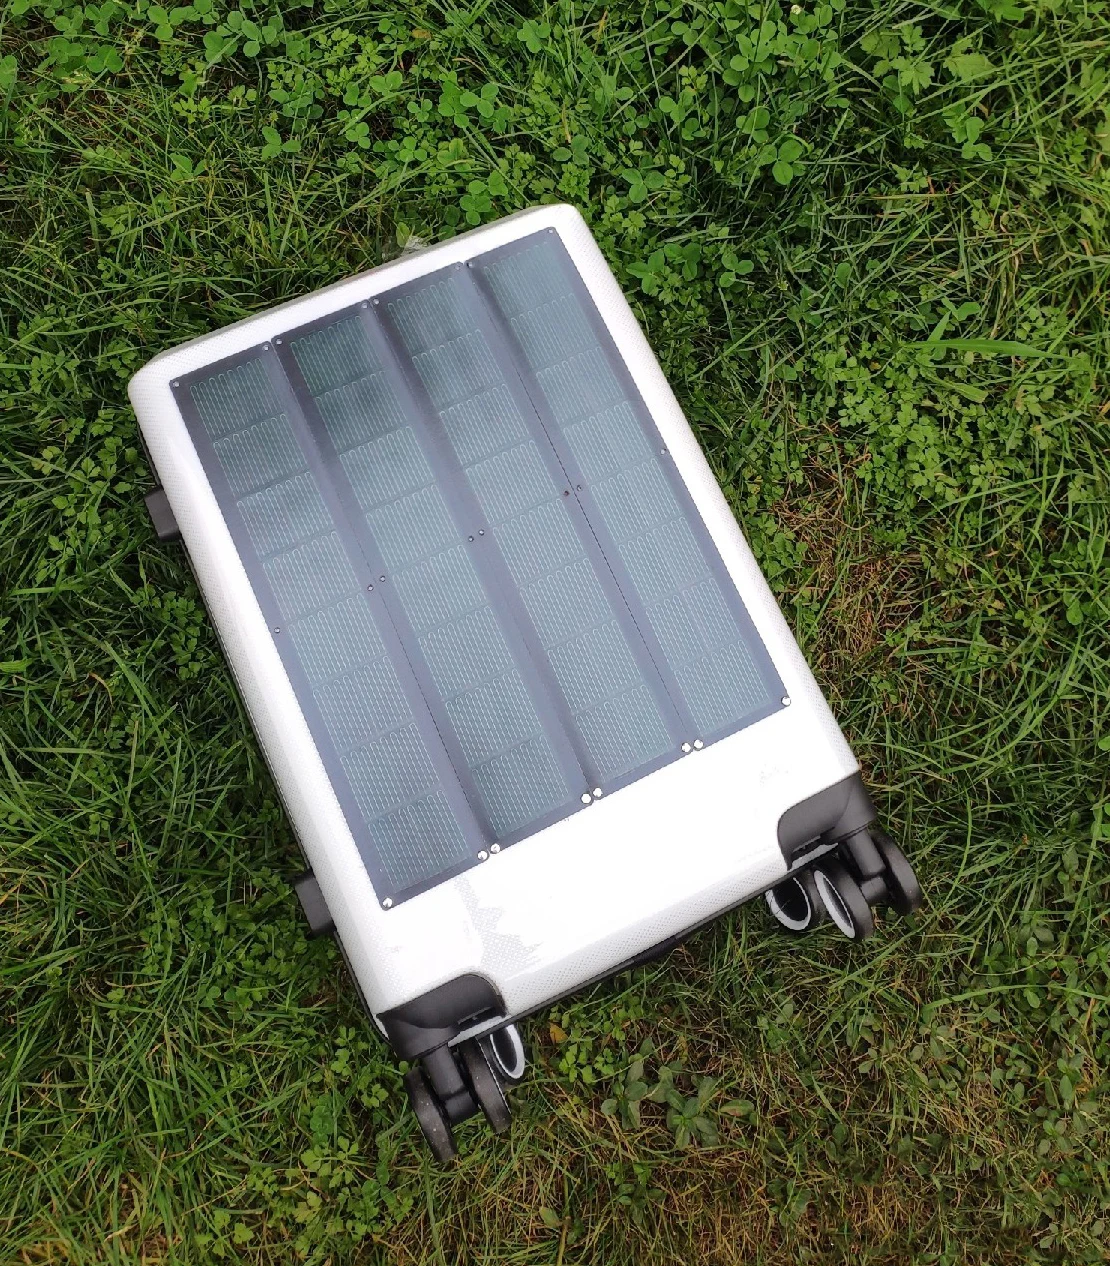 Flexible Long size panel solar power CIGS Thin Film solar panel DIY Battery Charger Photovoltaic solar cell flex Waterproof 2W7V